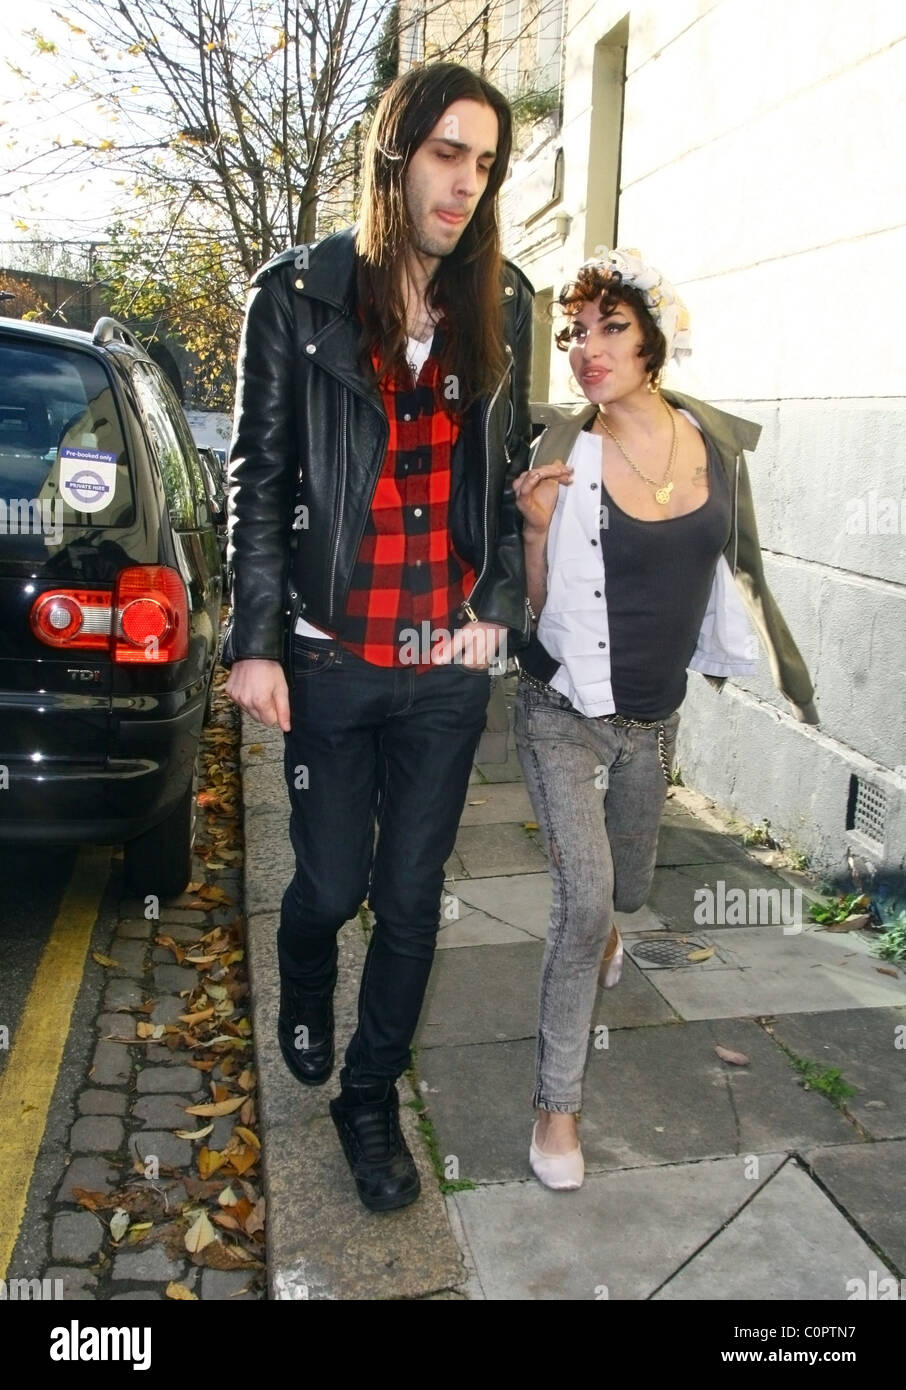 Blake Wood and Amy Winehouse looking happy as she goes for a drink in a  local pub with friends. London, England - 11.11.08 A Stock Photo - Alamy